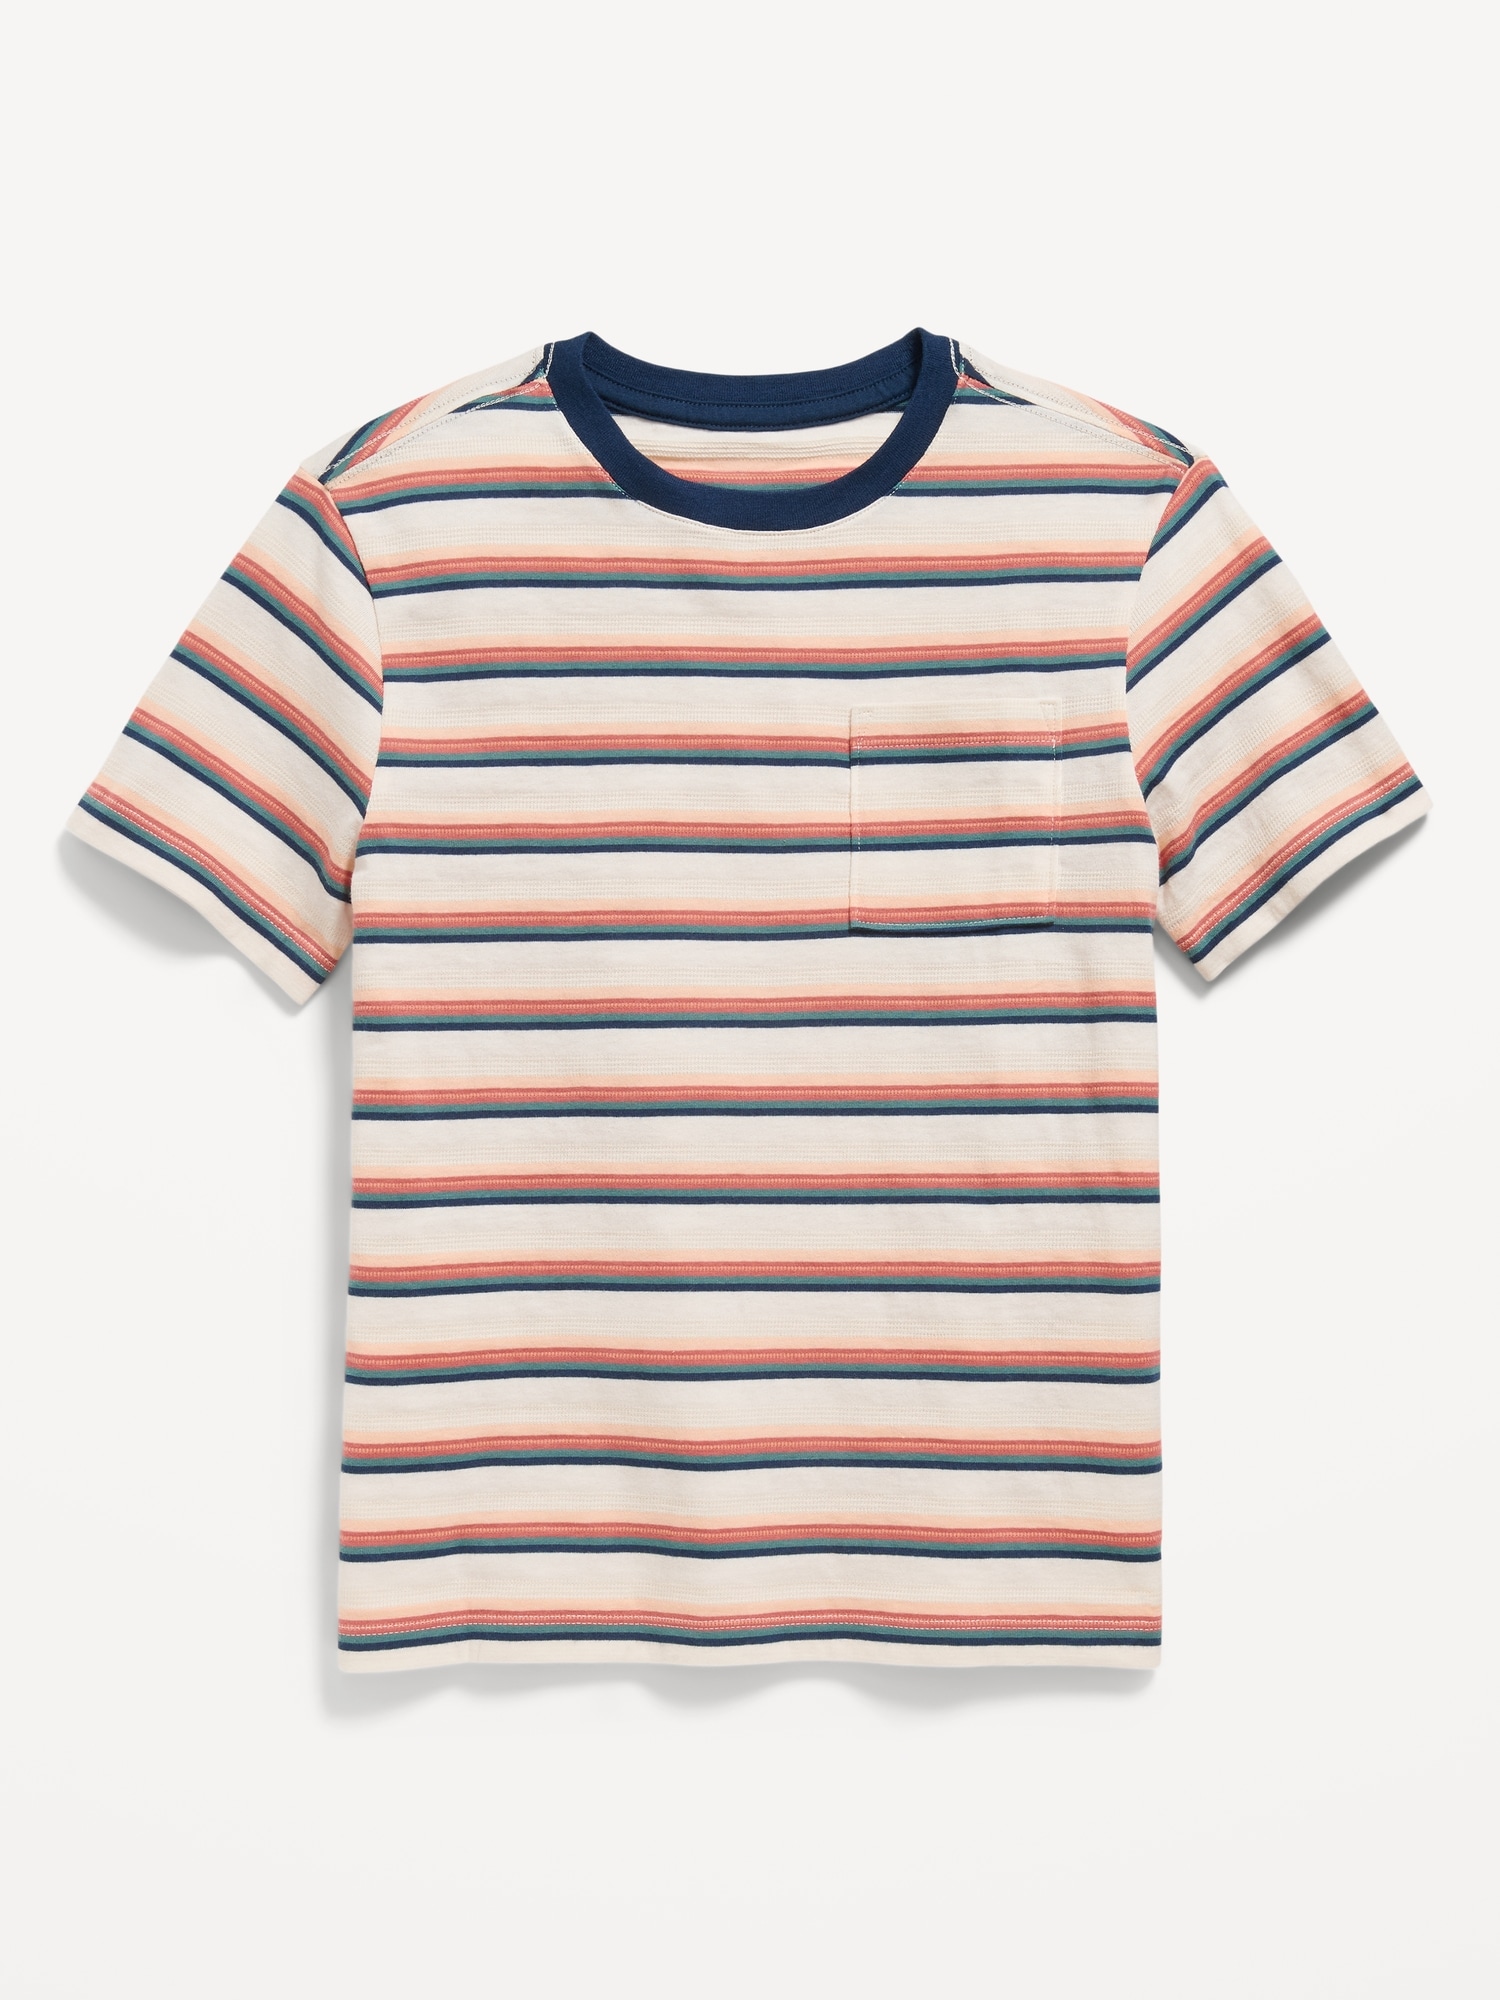 Knox Stripe - Short Sleeve T-Shirt for Young Men